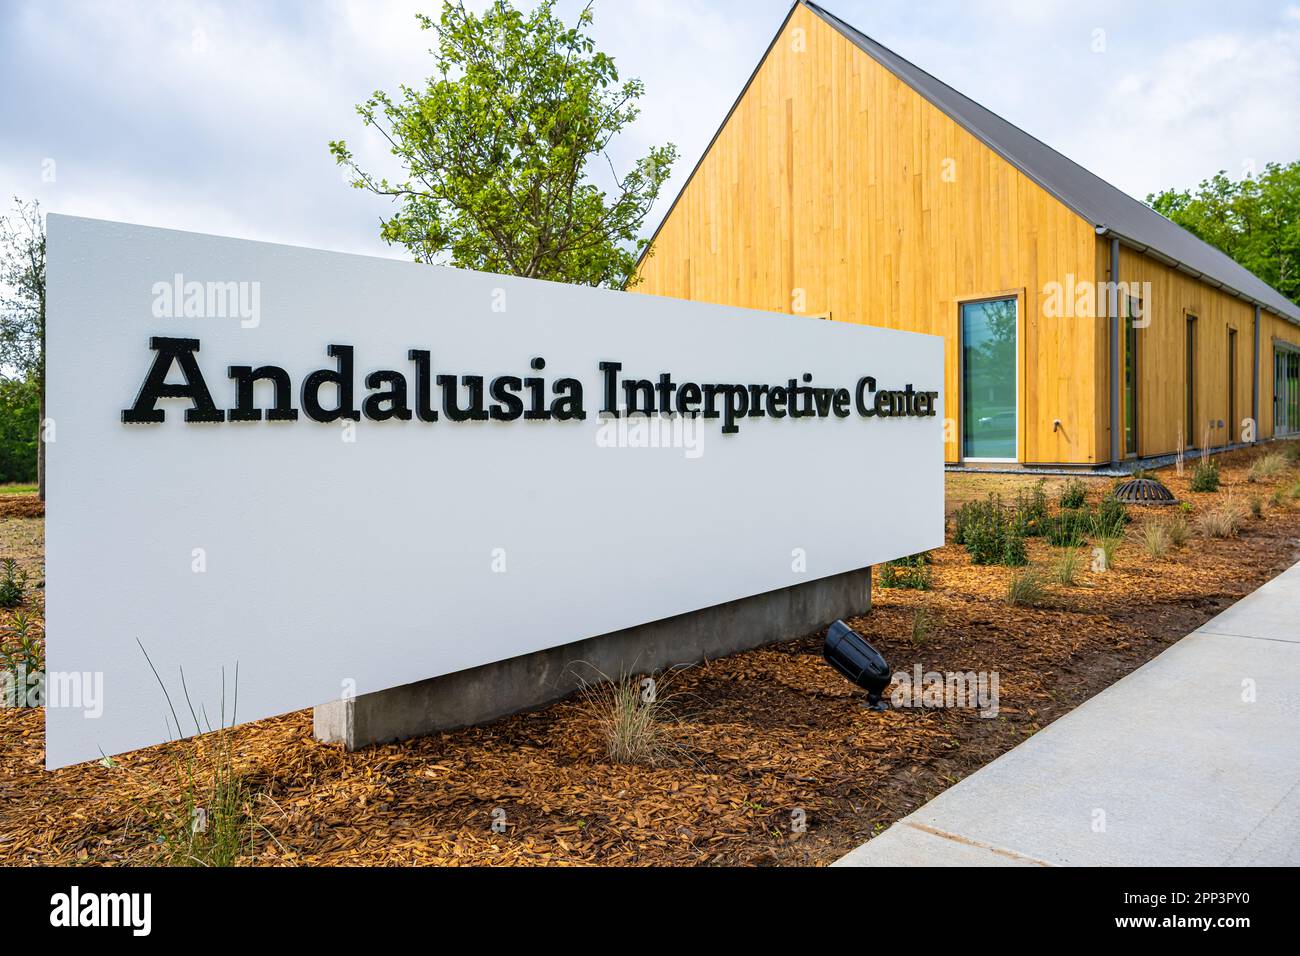 Andalusia Interpretive Center near the historic home of American Southern gothic writer Flannery O'Connor in Milledgeville, Georgia. (USA) Stock Photo